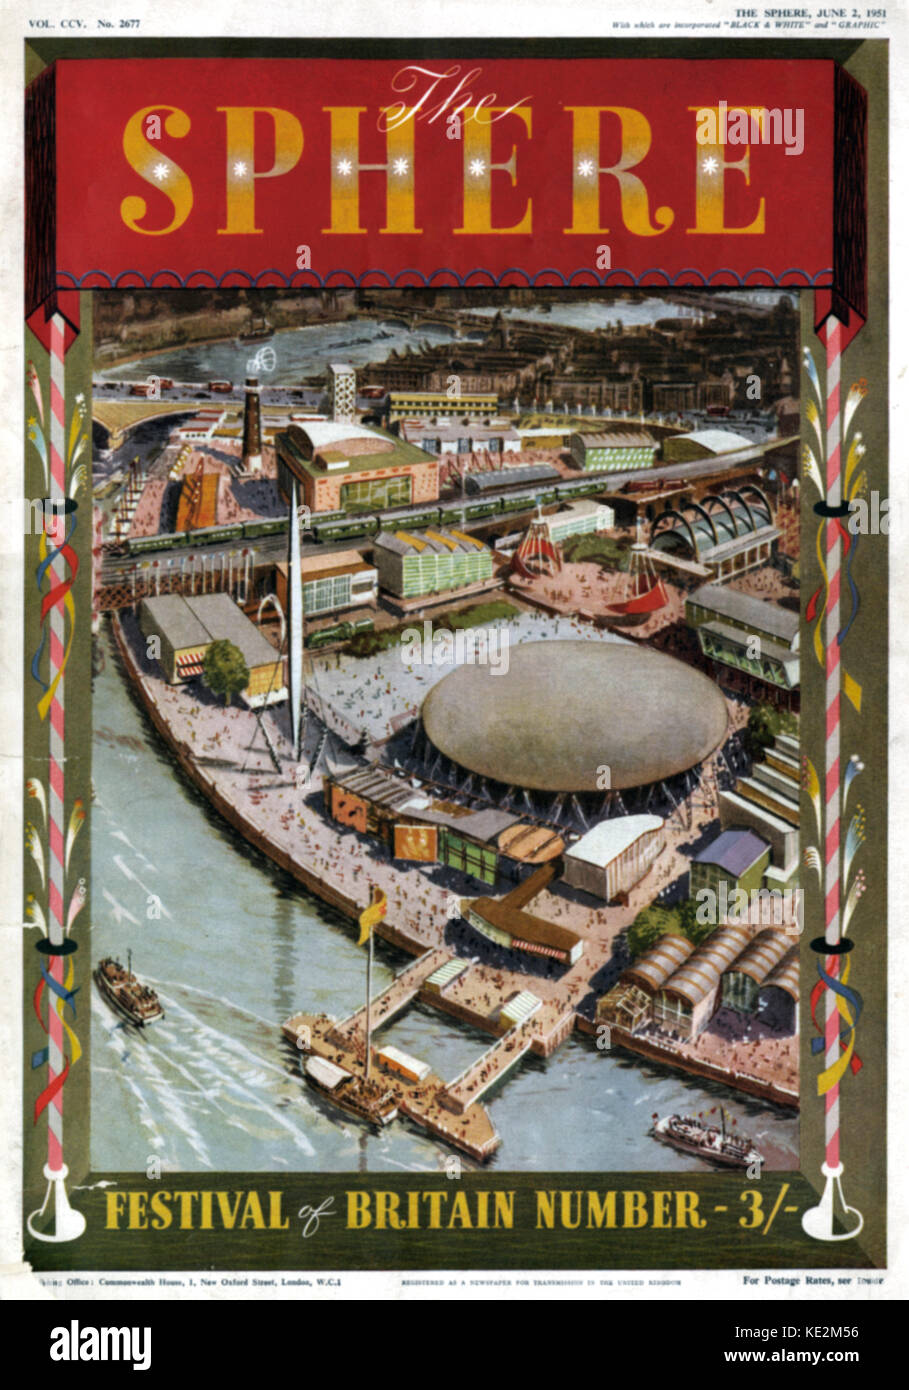 Festival of Britain - overview of buildings on cover of The Sphere 2 June, 1951 - special edition. Royal Festival Hall overlooking River Thames Stock Photo